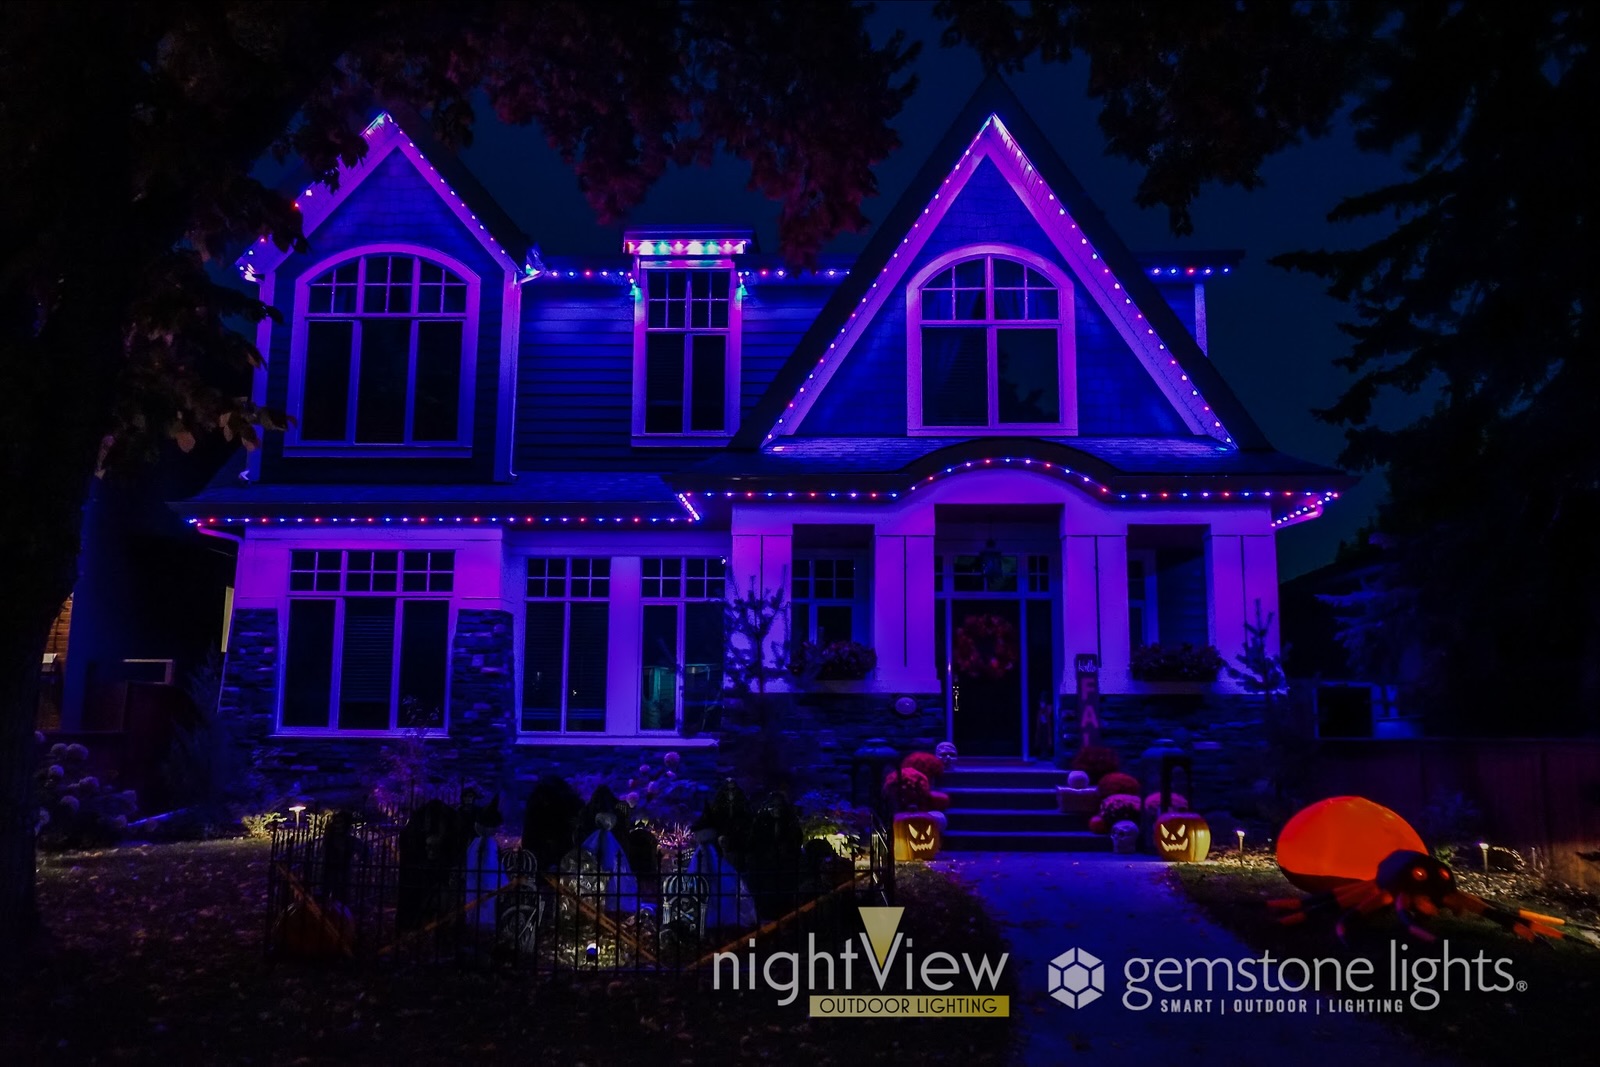 Permanent holiday lighting casts a purple glow on a home during the Halloween season